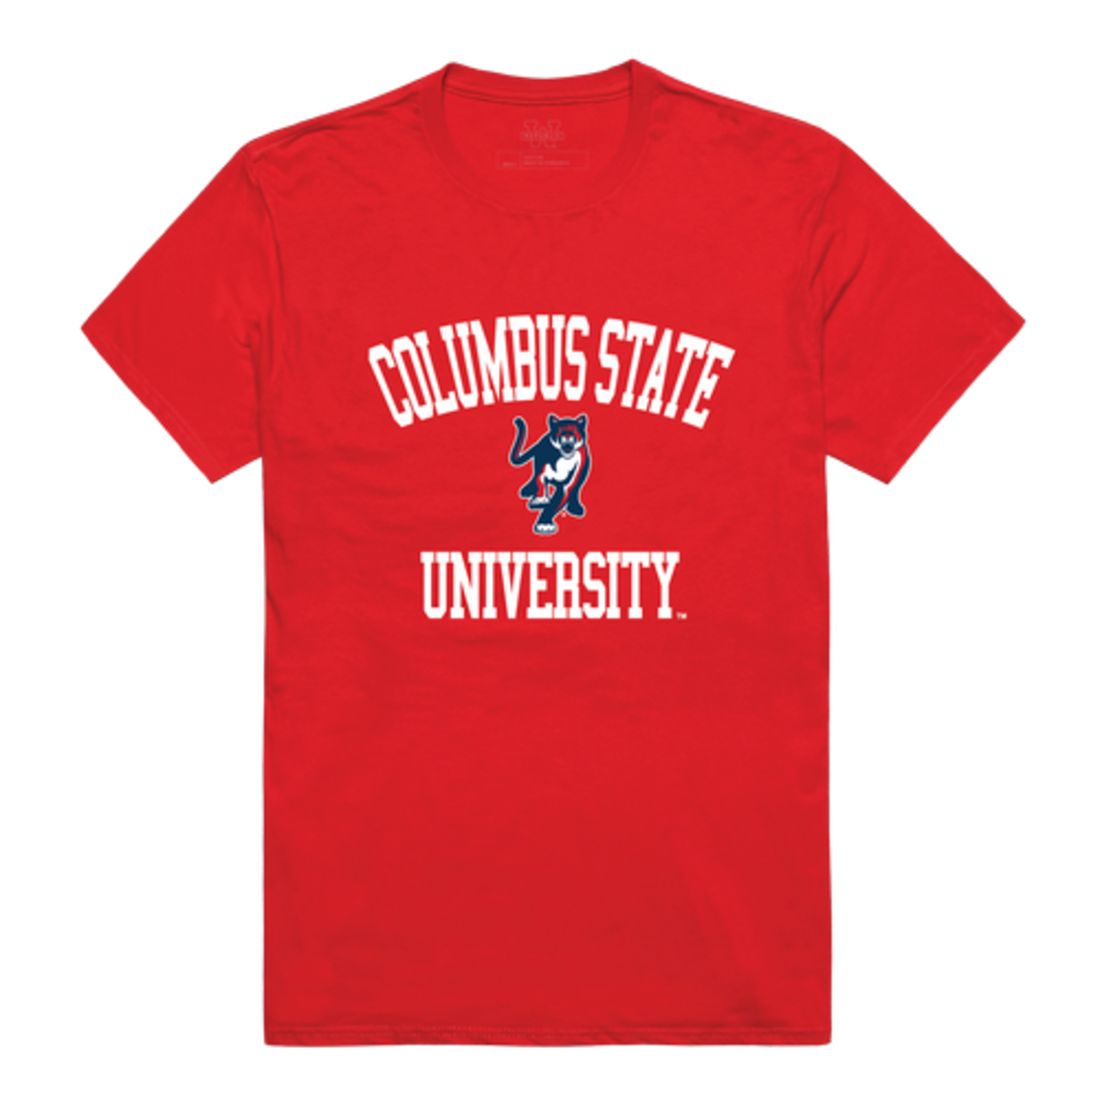 Columbus State University Cougars Arch T-Shirt Tee